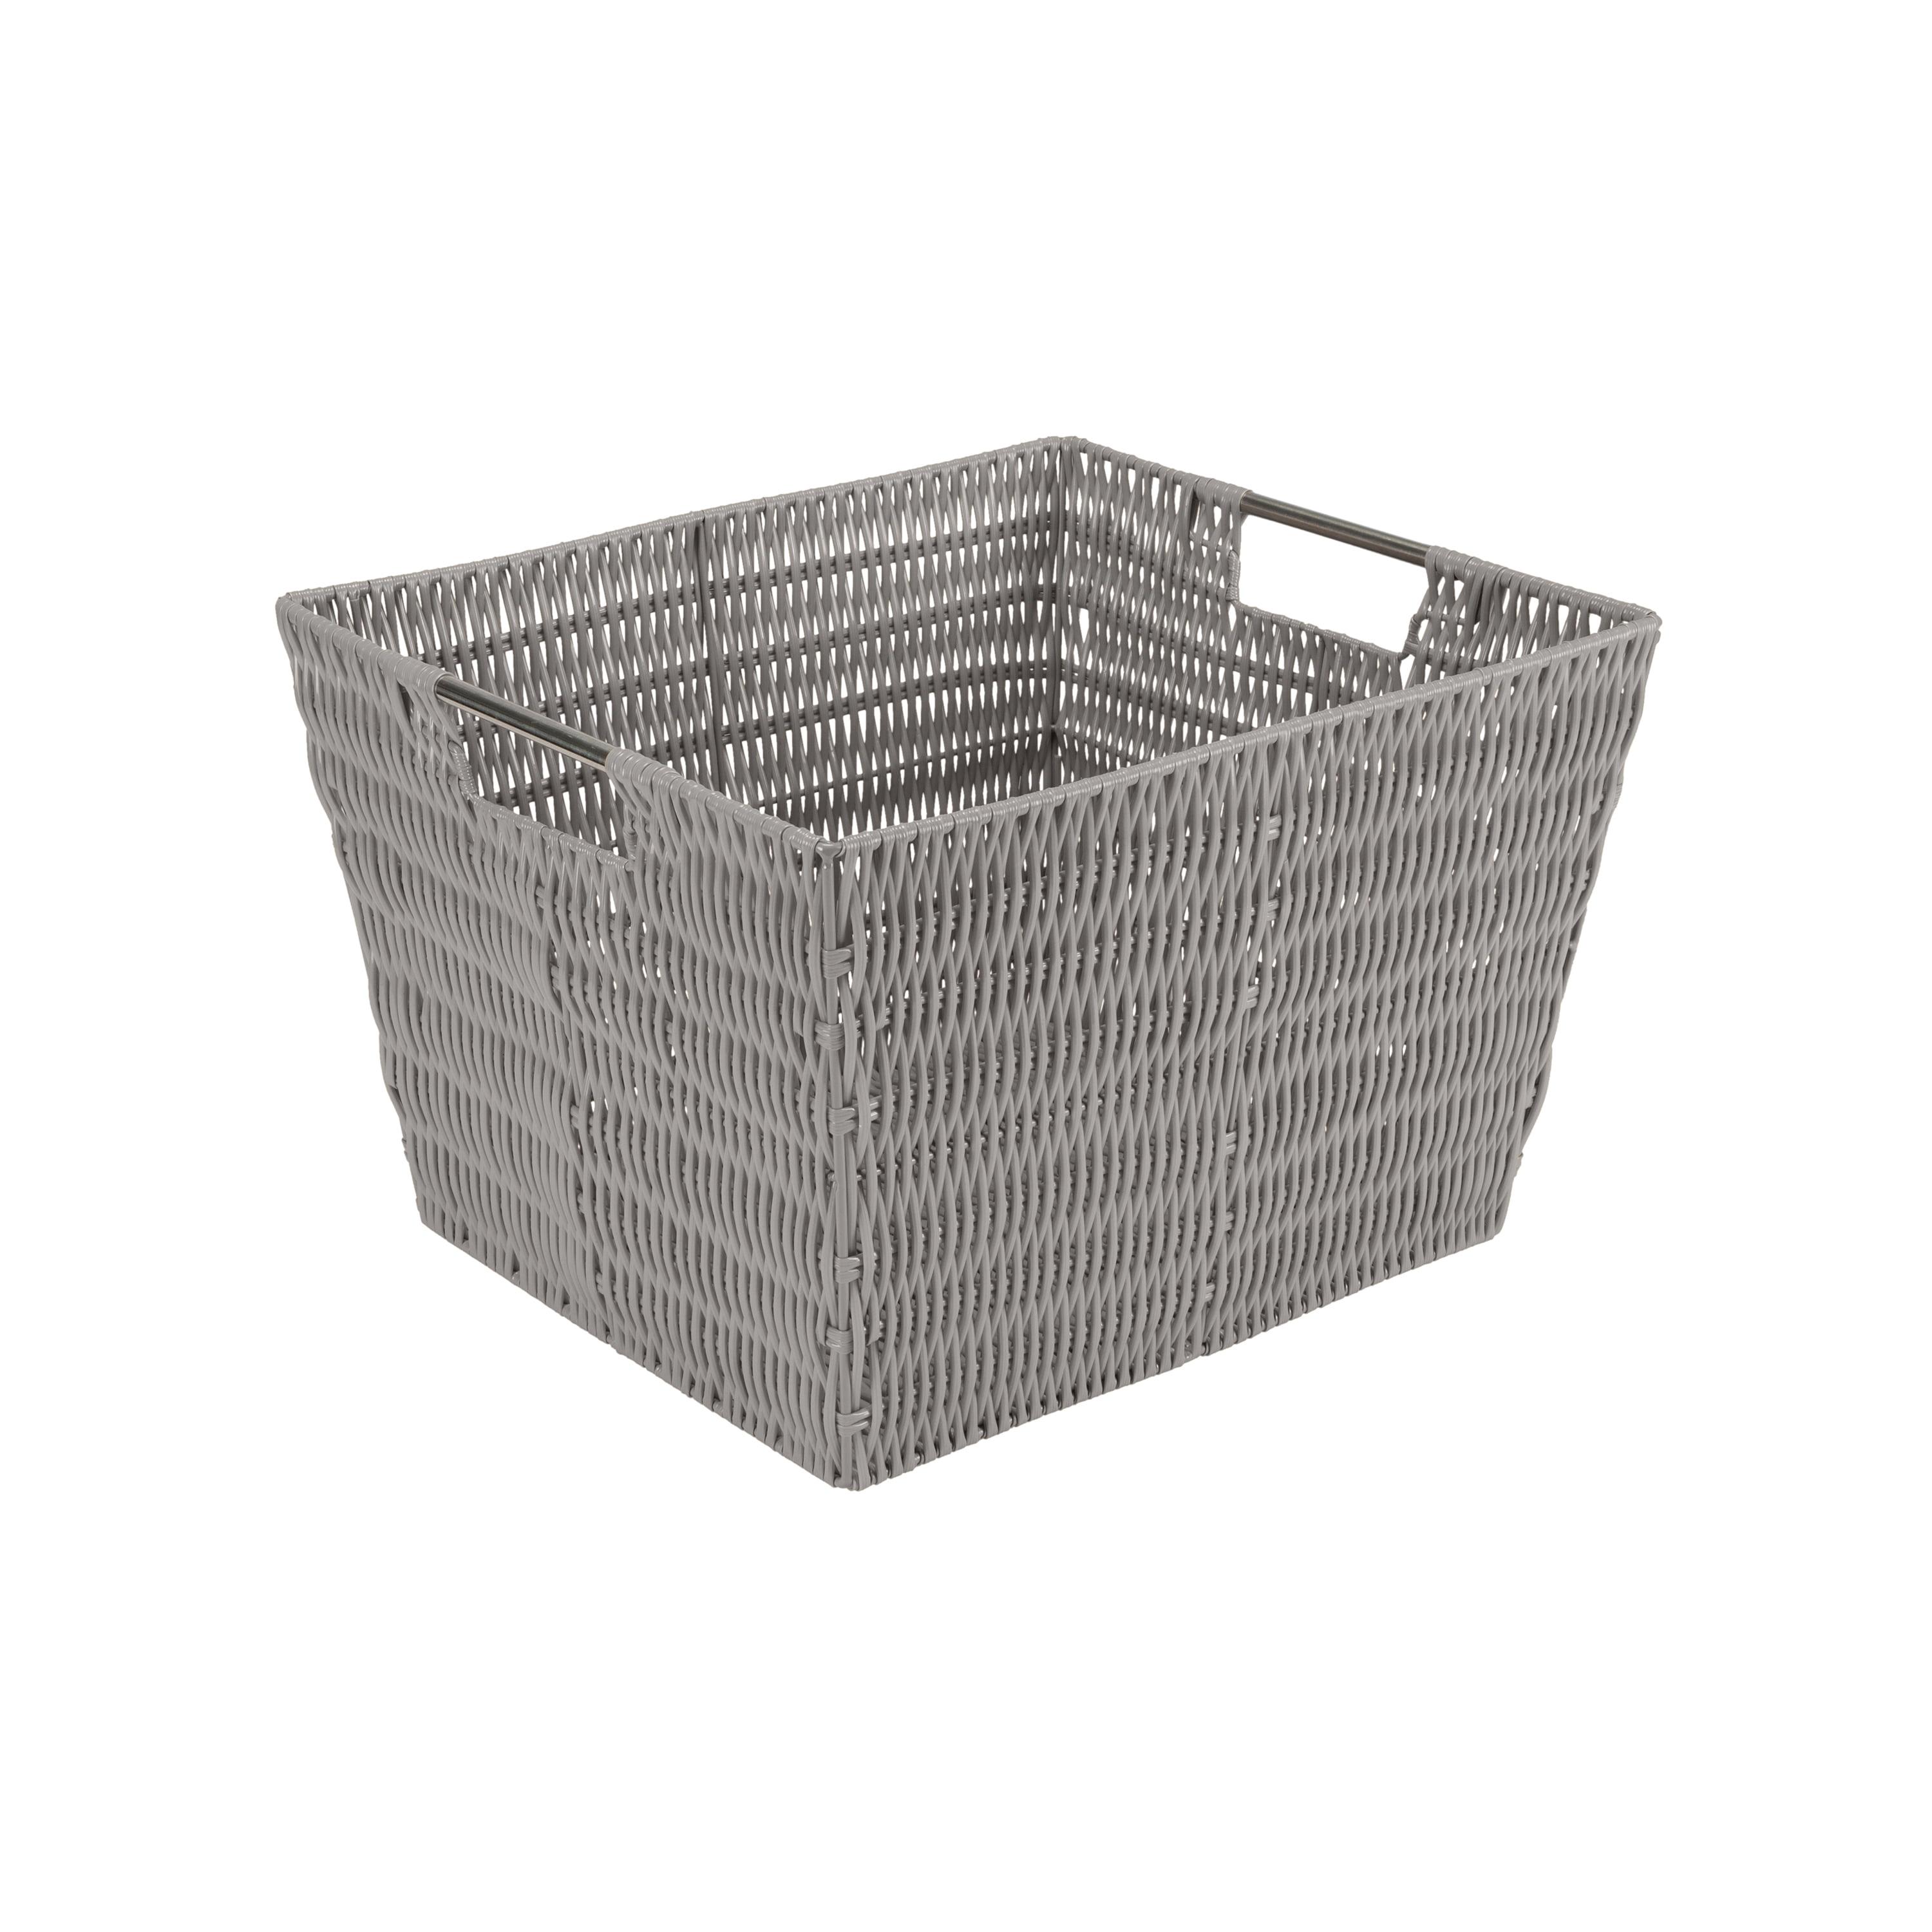 Elevate Rectangular Rattan Storage Tote with Stainless Steel Handles - Gray